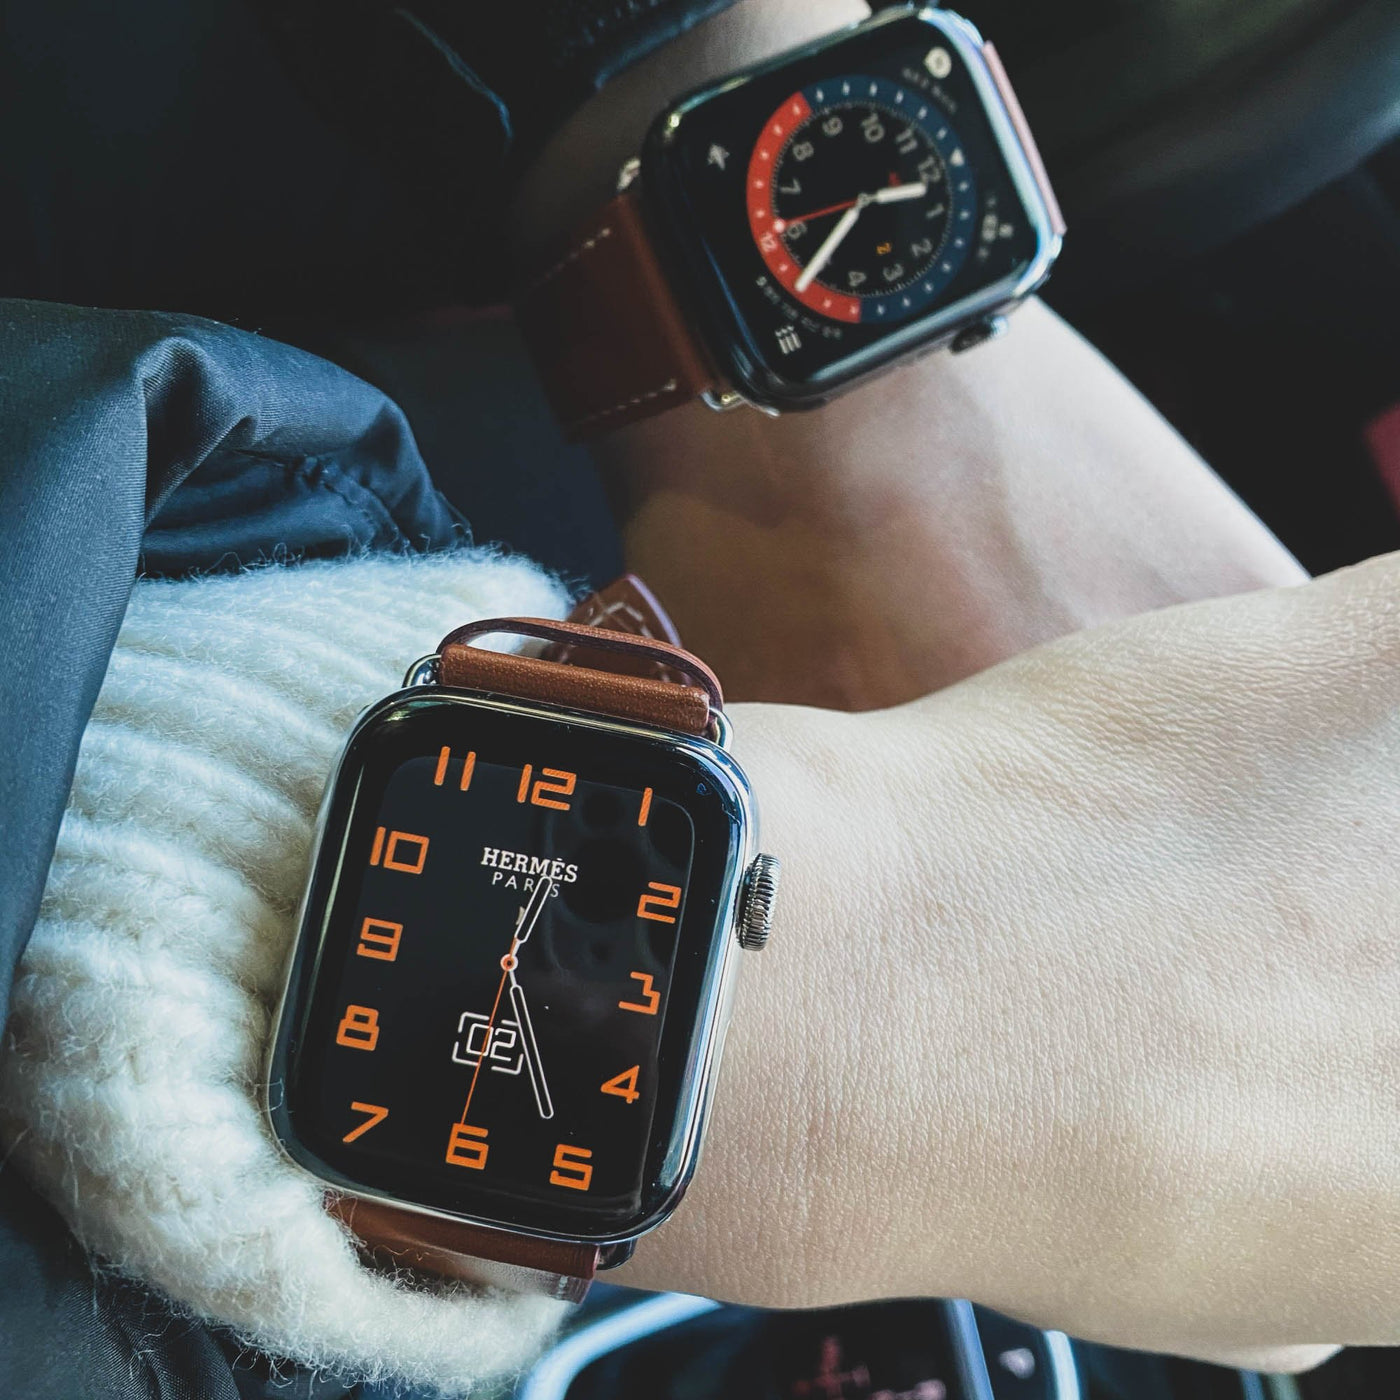 Urban Style Leather Band For Apple Watch